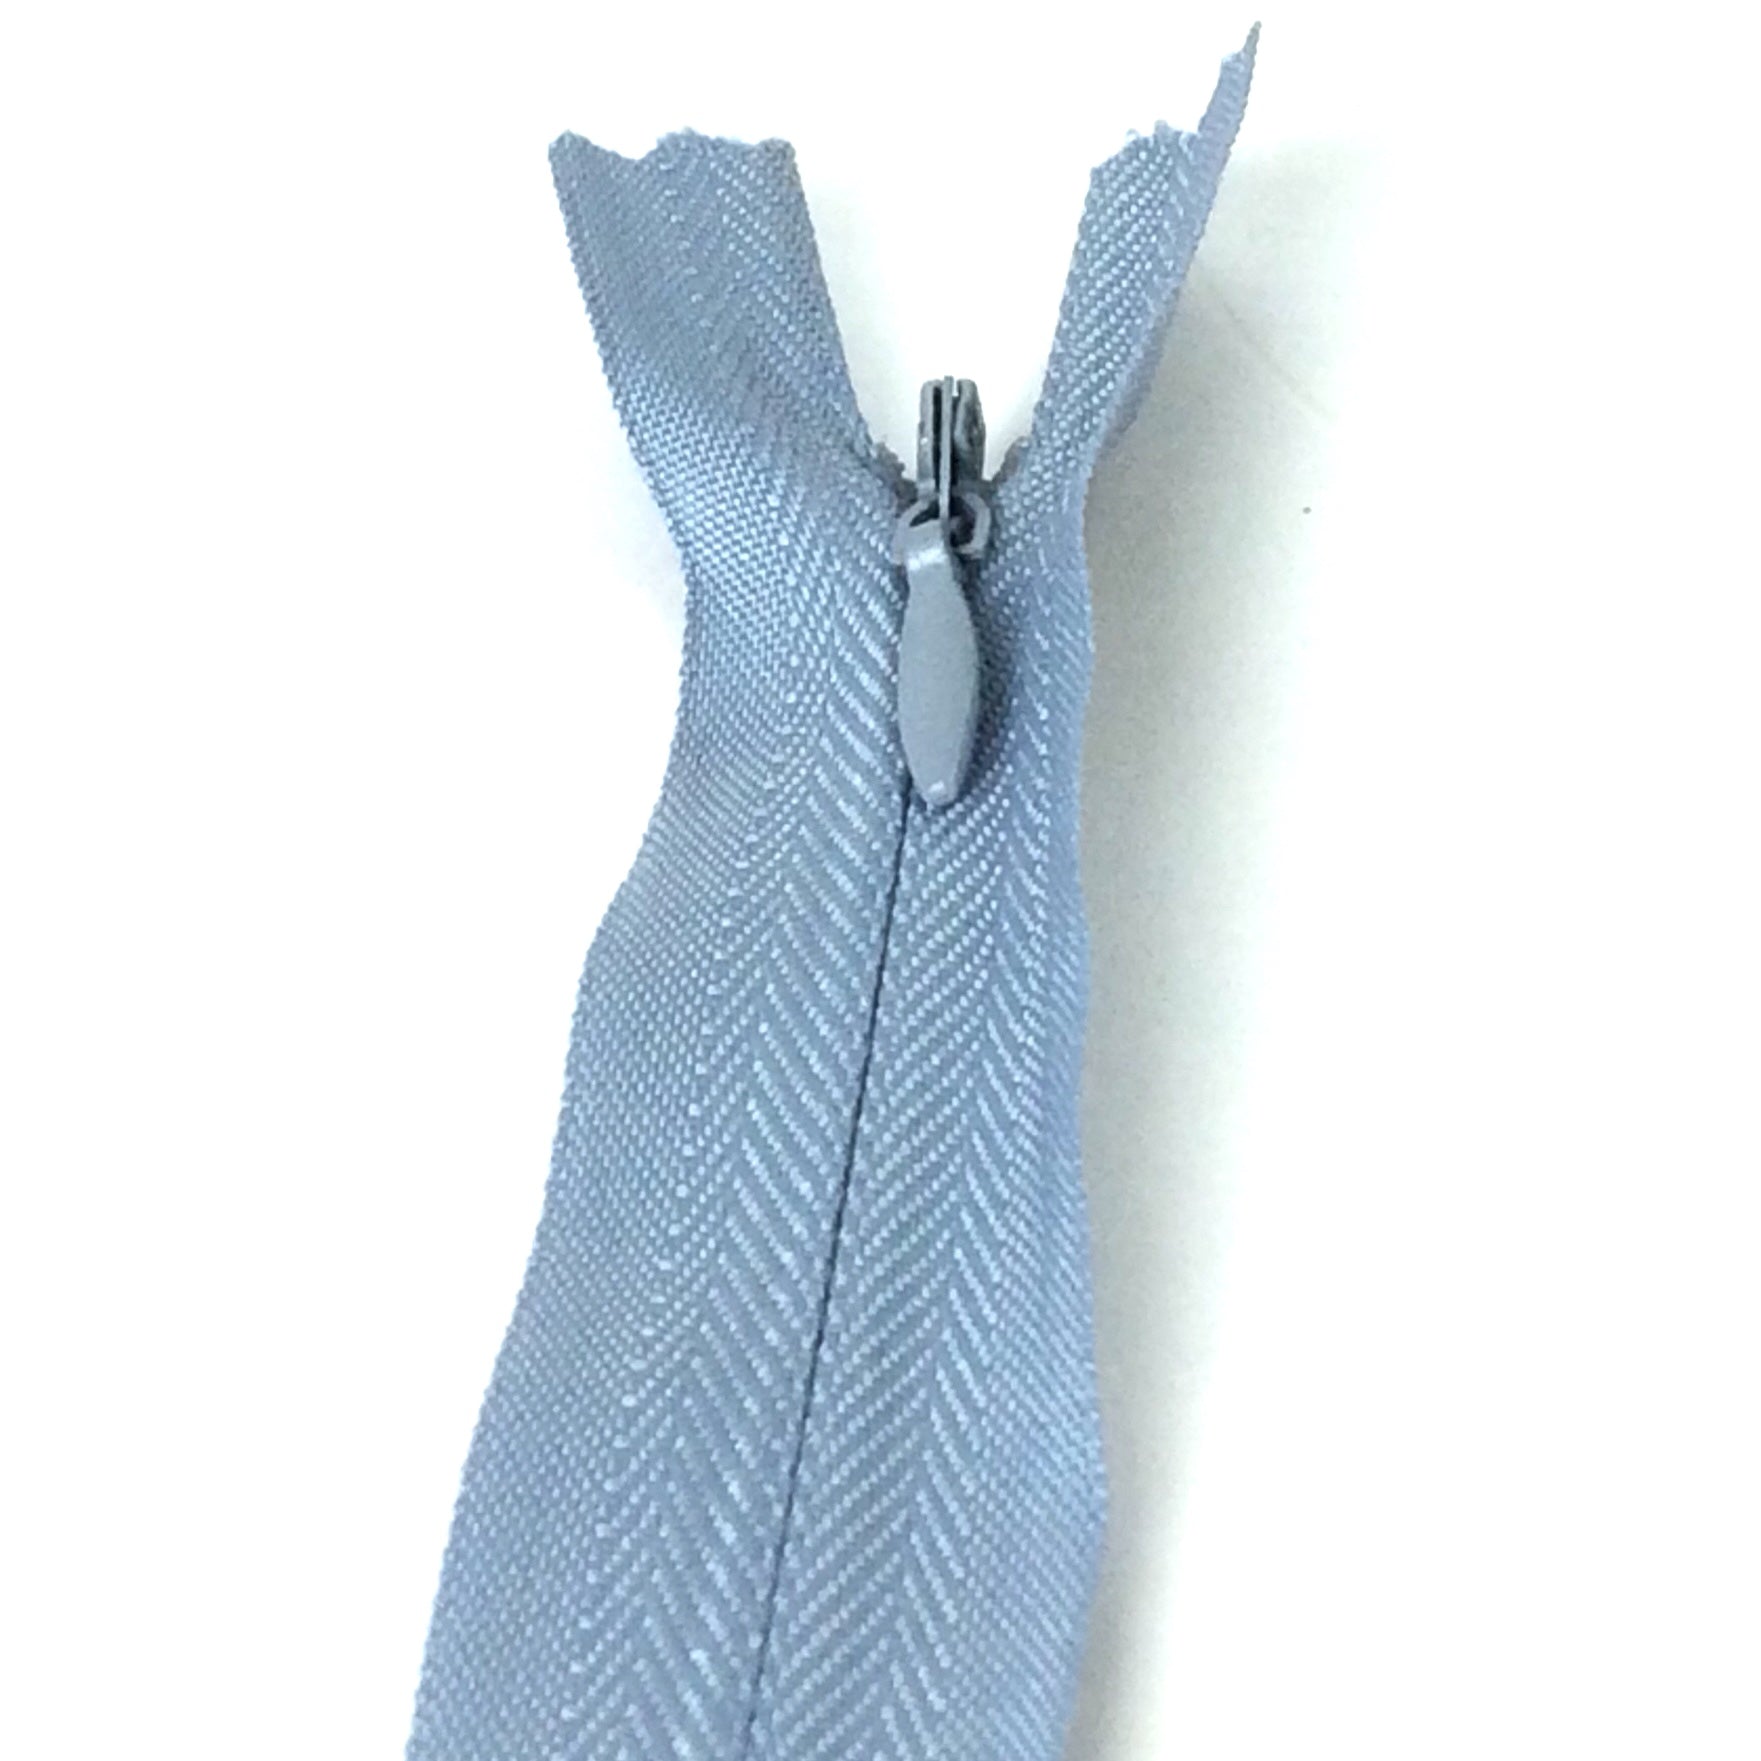 Photo of grey invisible or concealed zips available in many different colours and sizes. Great for achieving a professional finish in your products. Invisible zippers are perfect for dressmaking, cushions, crafts, etc., where you don't want your zipper showing. Installing them can be tricky without the right foot on your machine; a normal zipper foot is for installing standard zippers, while you will need an invisible zipper foot for a professional result